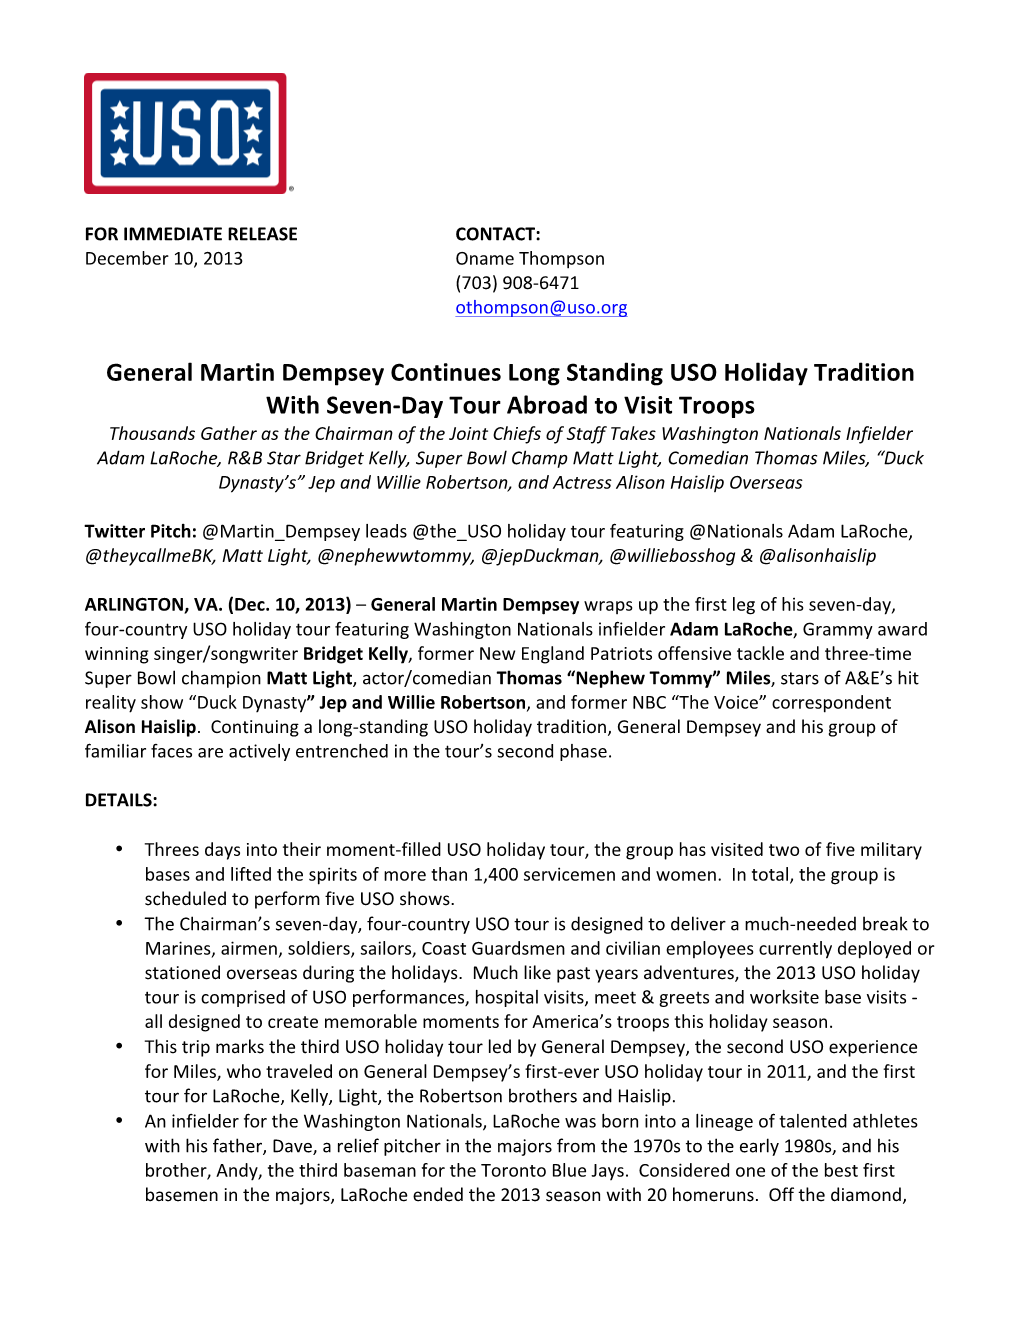 General Martin Dempsey Continues Long Standing USO Holiday Tradition with Seven-‐Da